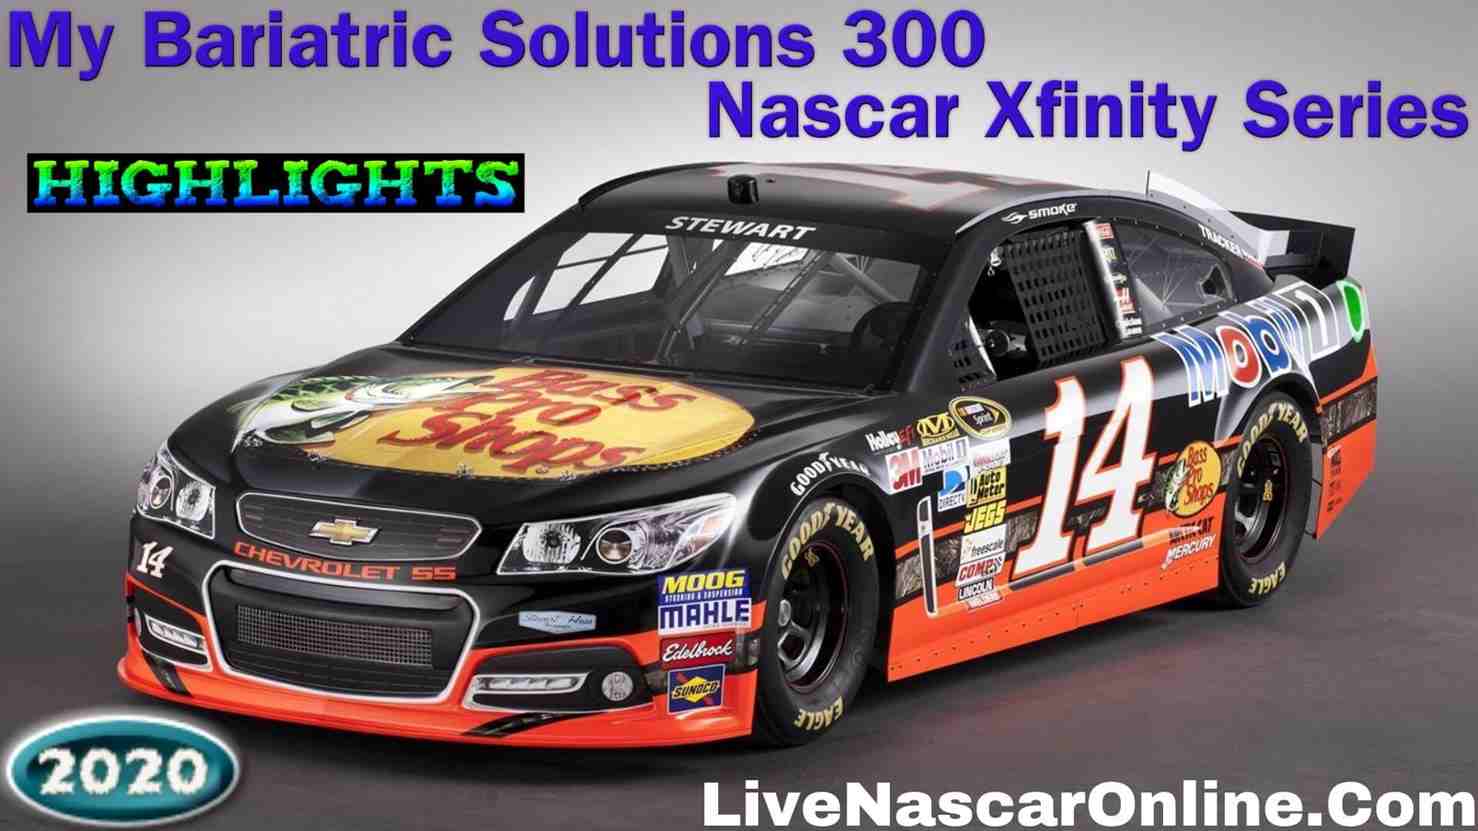 My Bariatric Solutions 300 Xfinity Series Highlights 2020